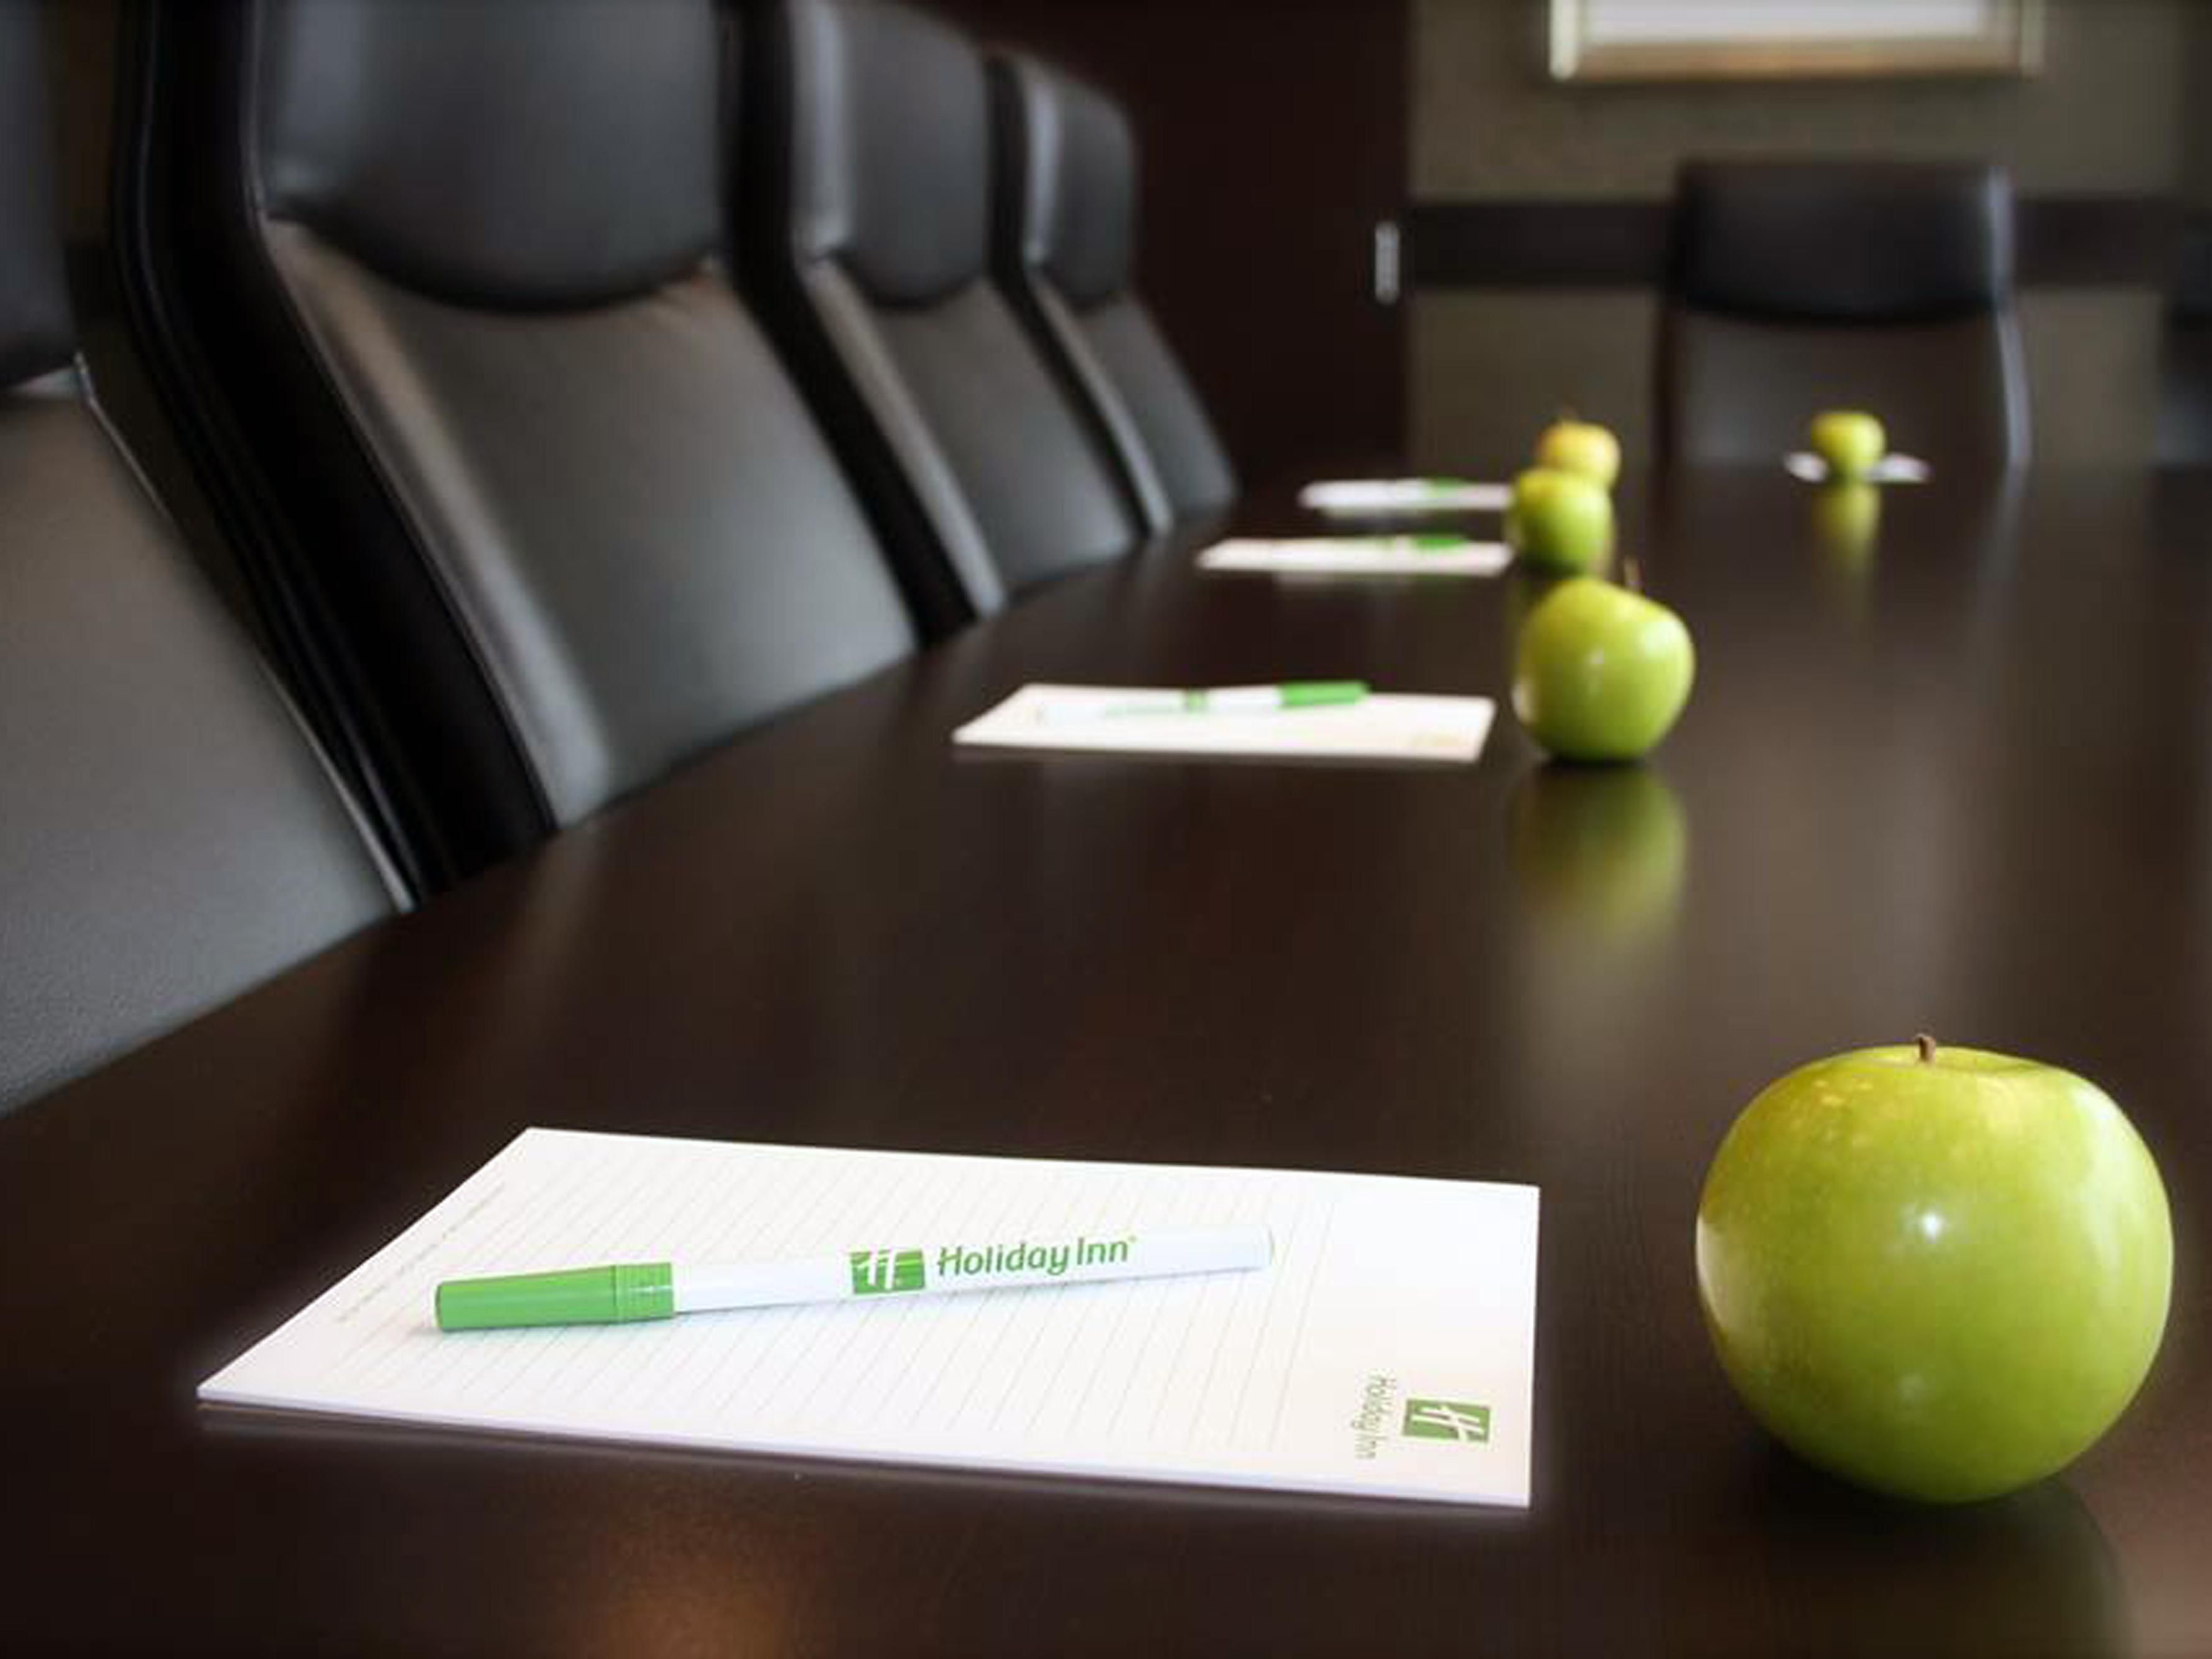 Our prime location in downtown Saskatoon is the perfect place to organize your  small meeting. We are pleased to offer you a quiet place to gather, variety of set up configurations, food and beverage options to suit any meeting requirements.